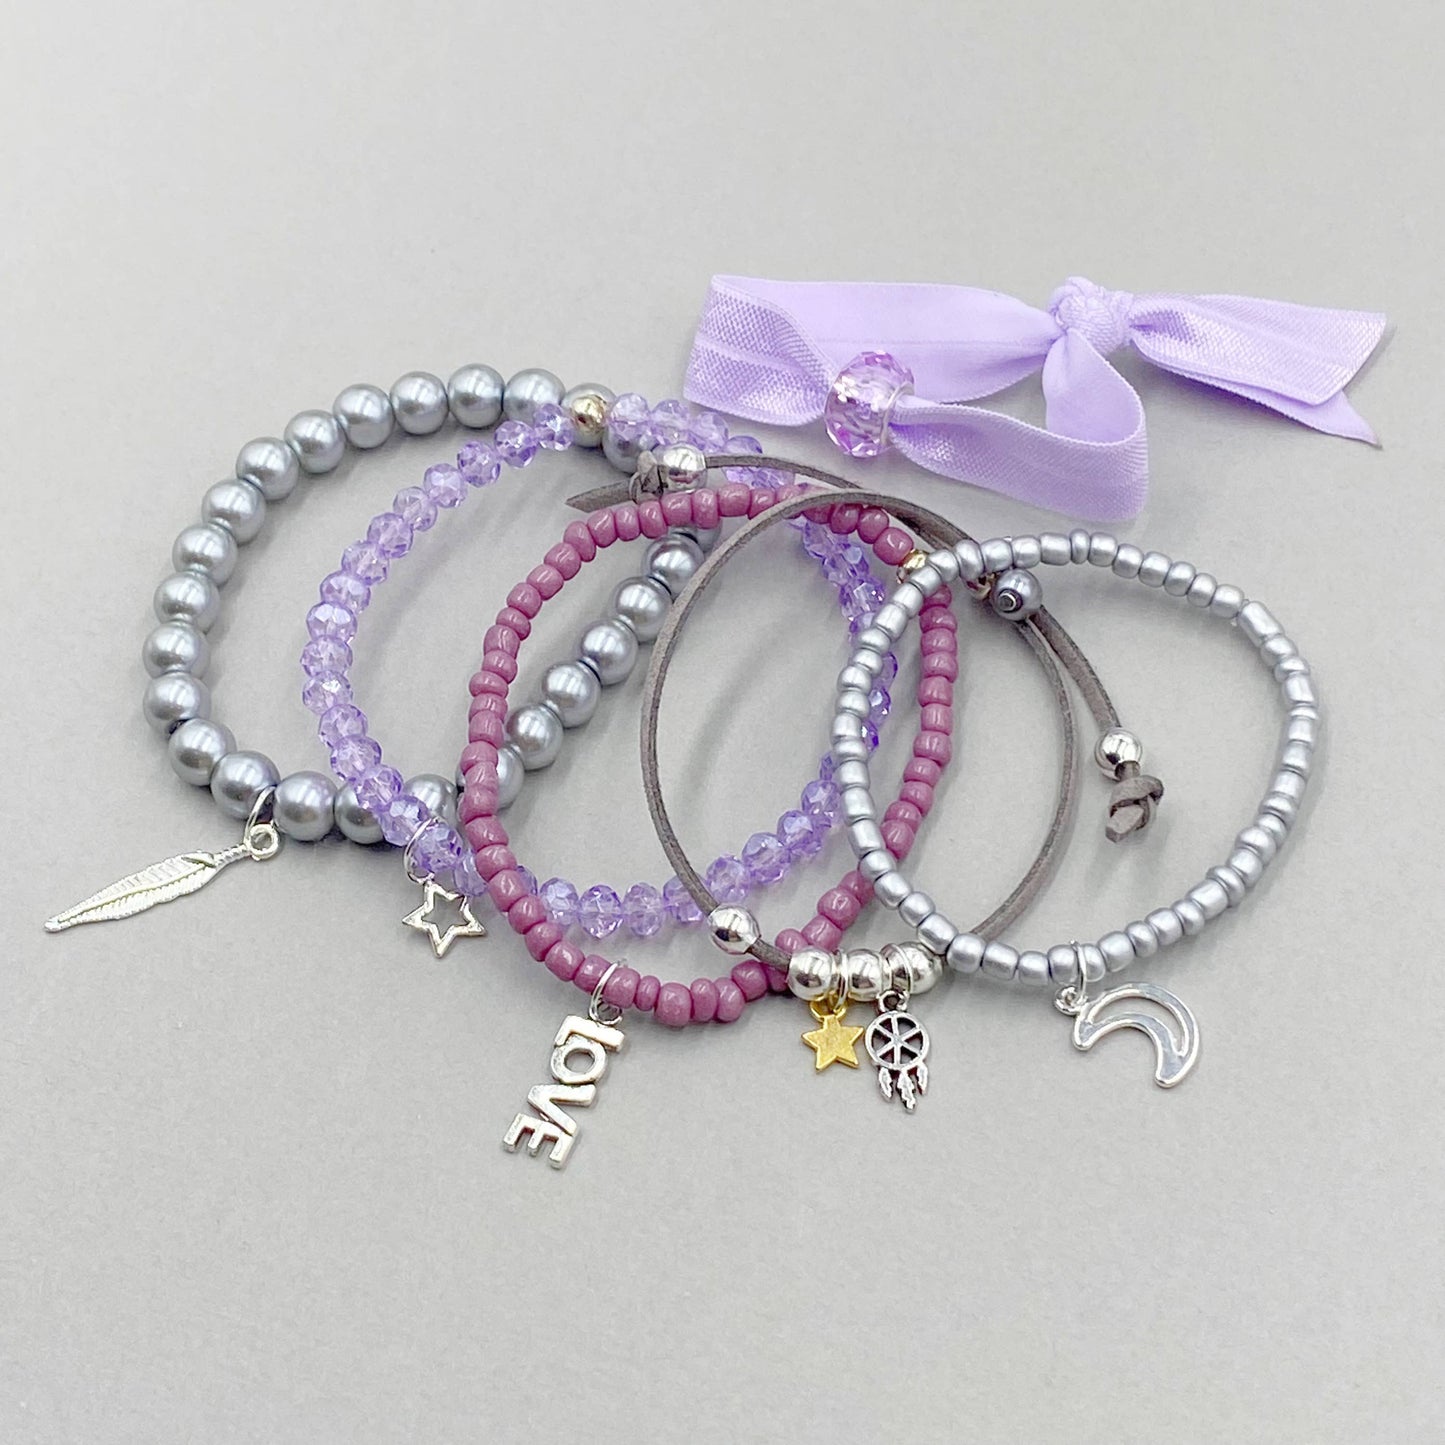 Thistle Berry Bracelet Making Kit for Teens/Adults